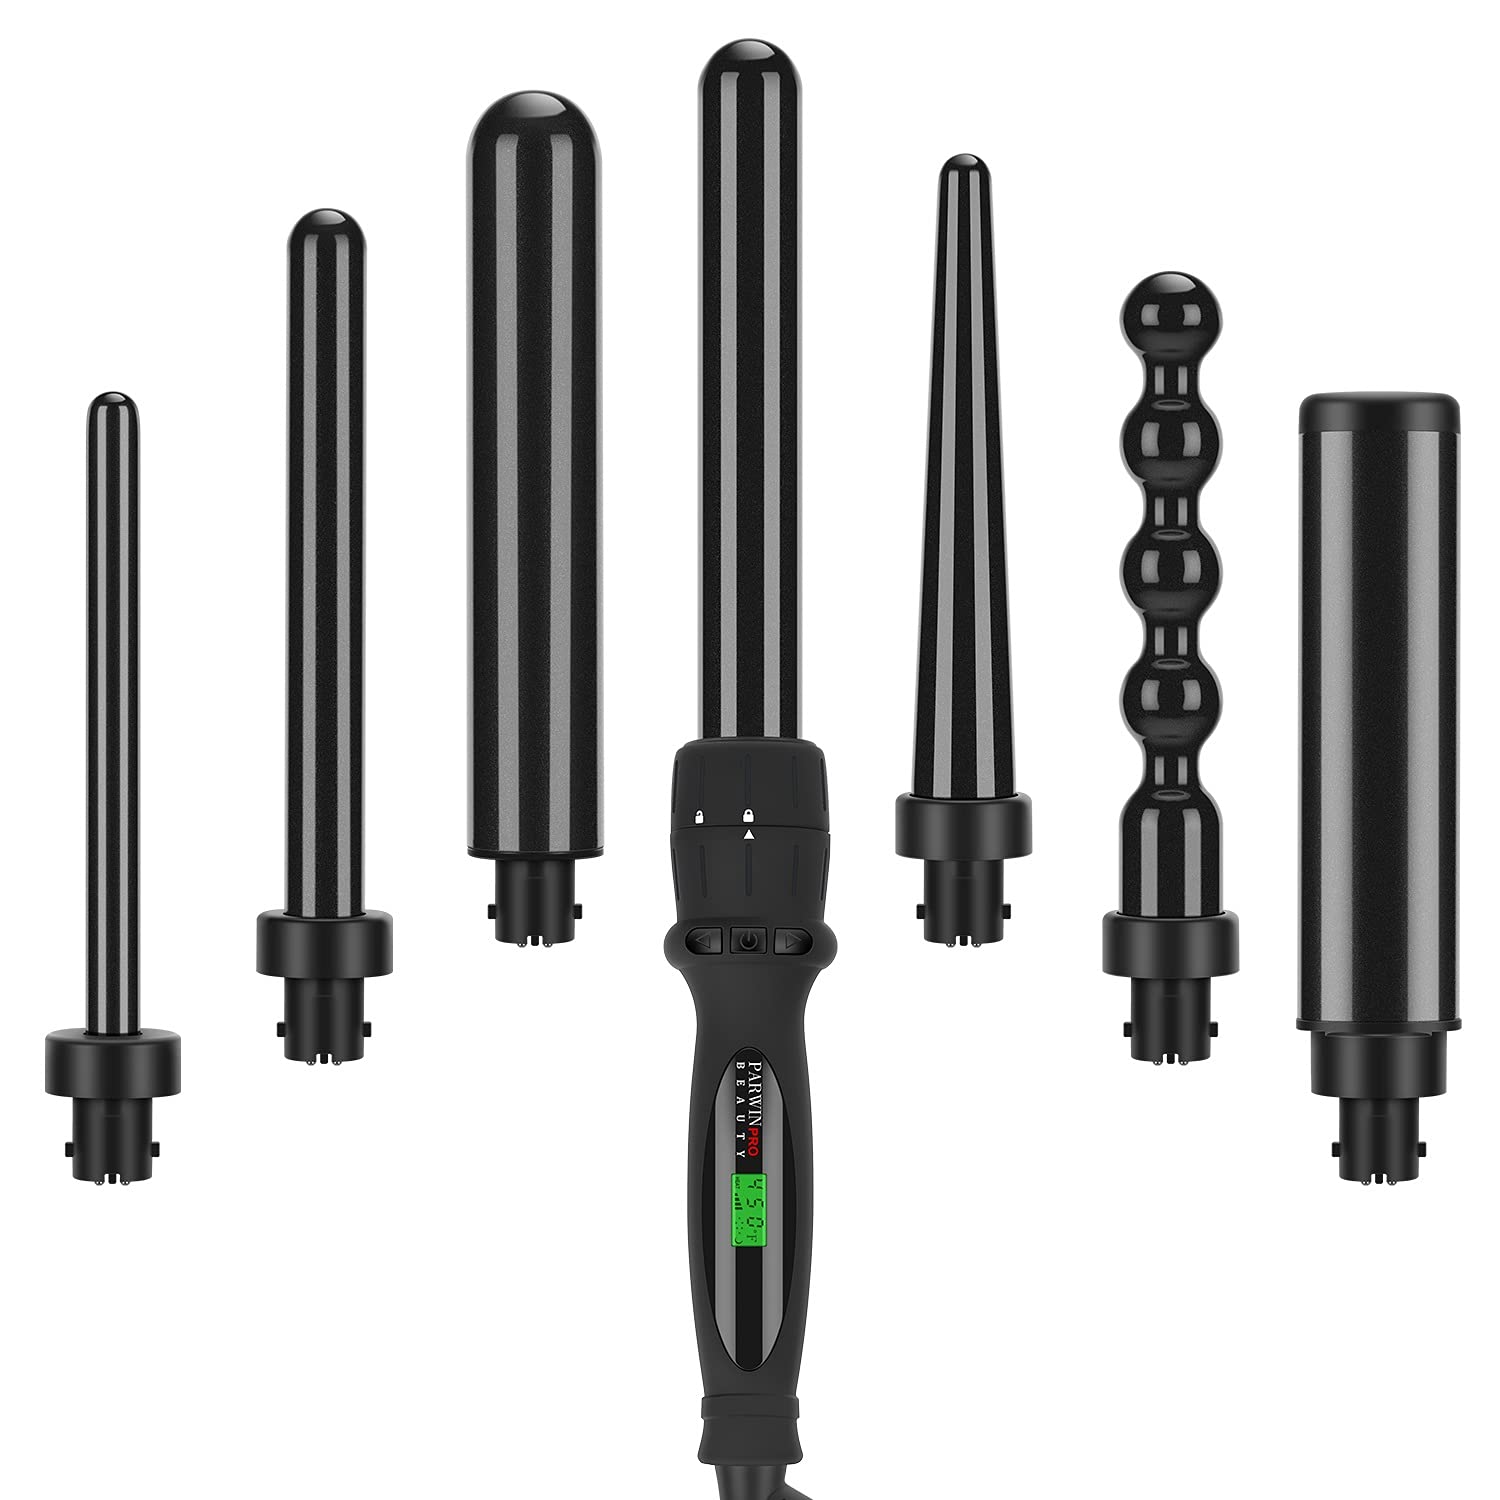 7 in 1 Curling iron set with interchangable barrles | Ceramic Curling Iron Set - Brilliance New York Online